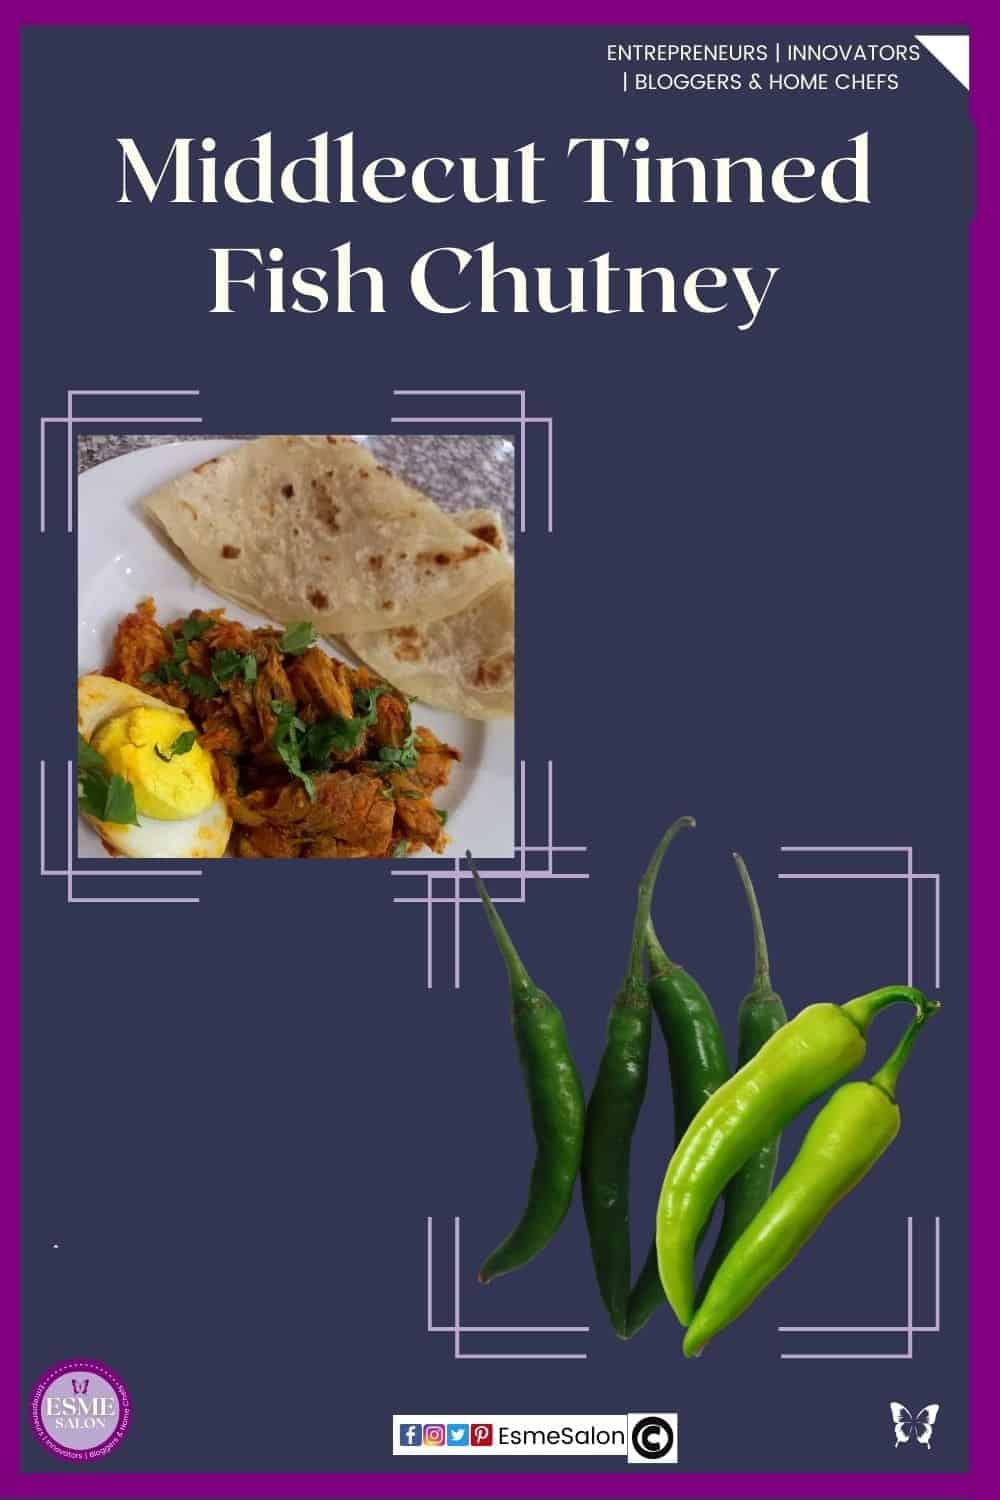 an image of a plate with Middlecut Tinned Fish Chutney and roti